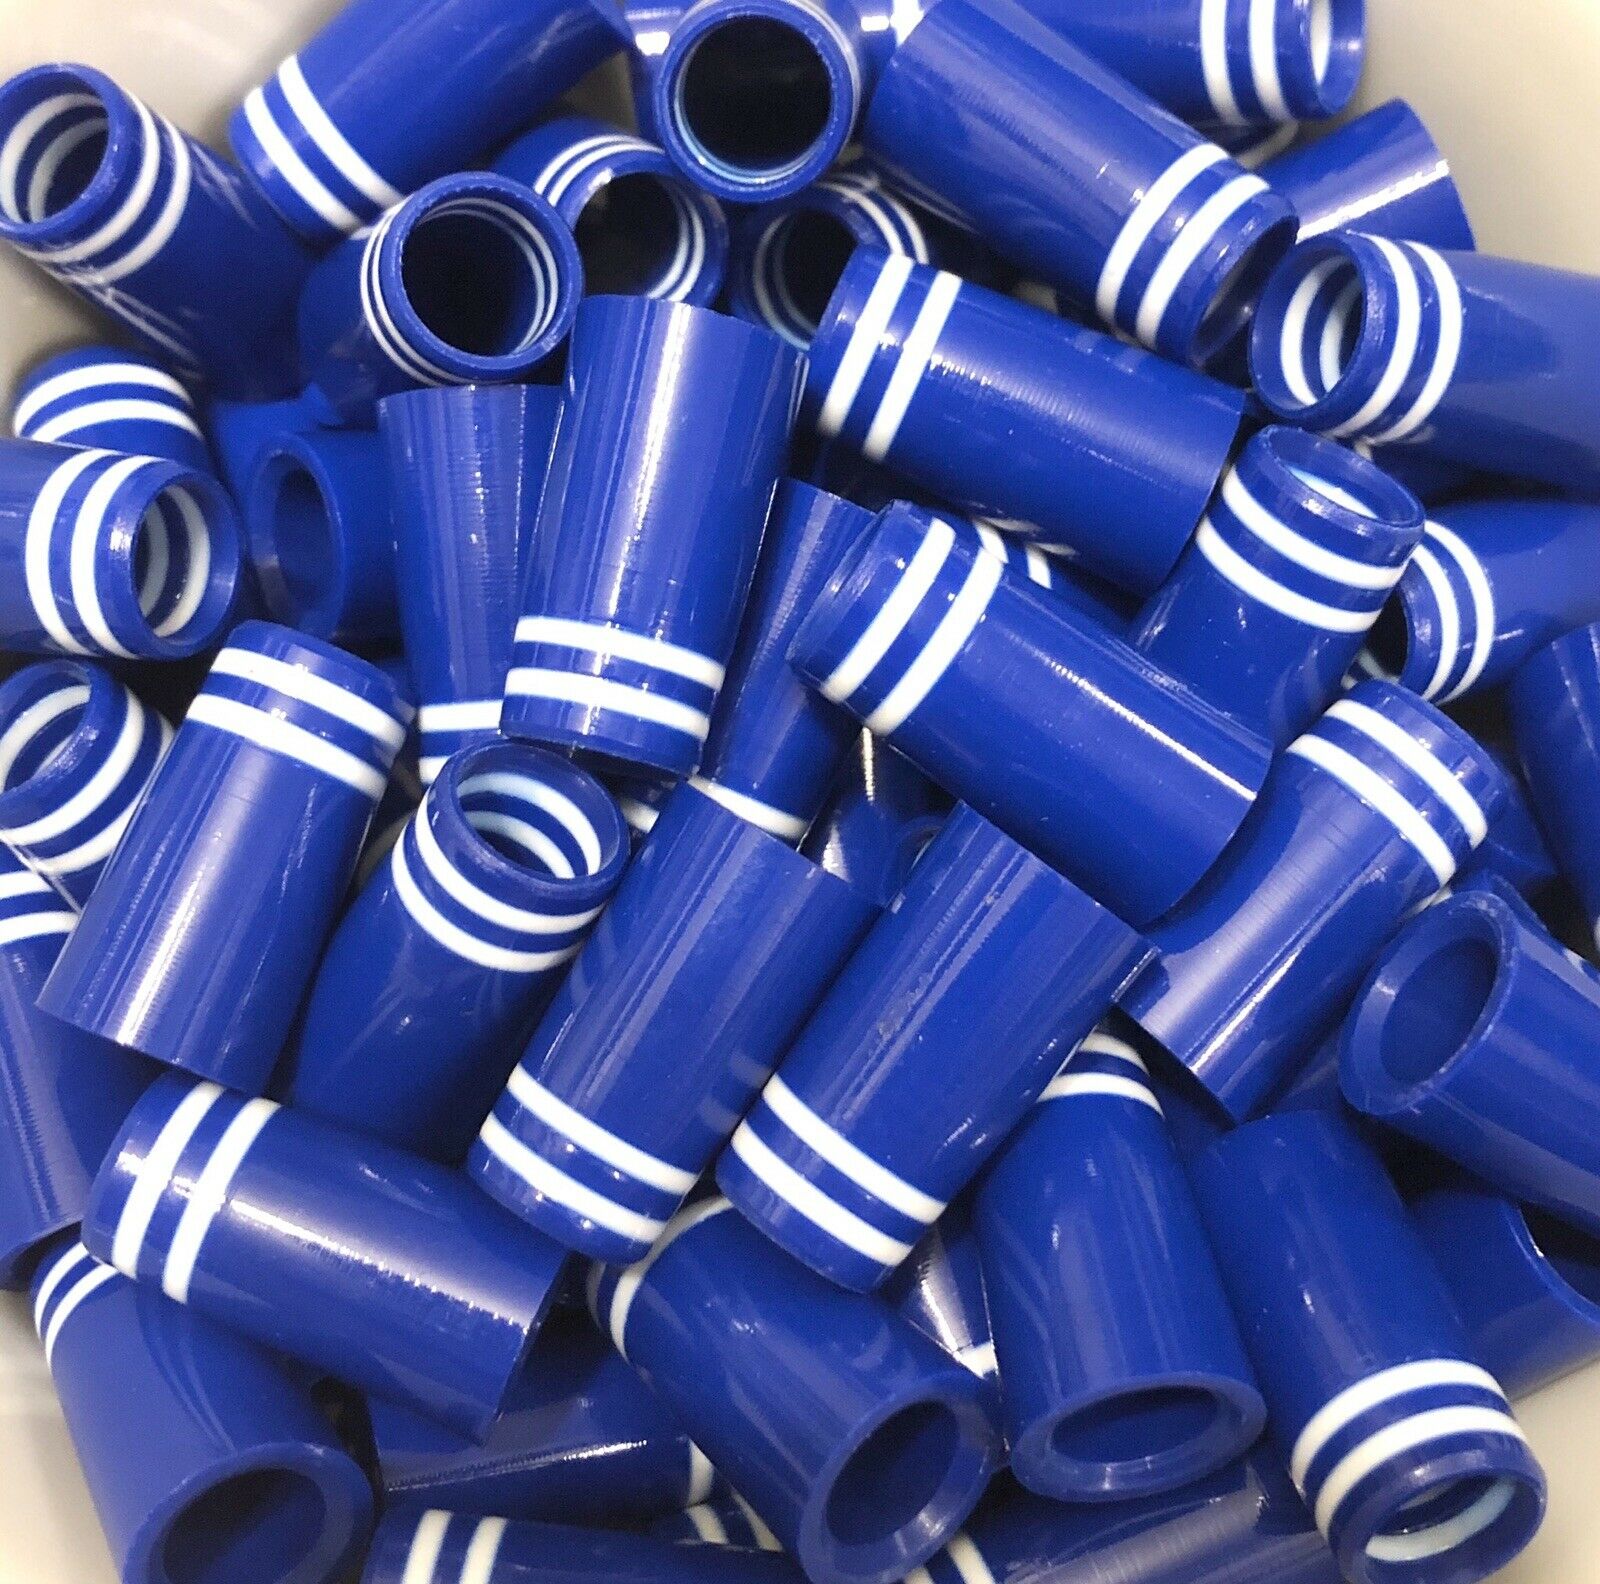 Premium Quality Iron Ferrules Blue w/ Double White Rings 1” - The Golf Club Trader